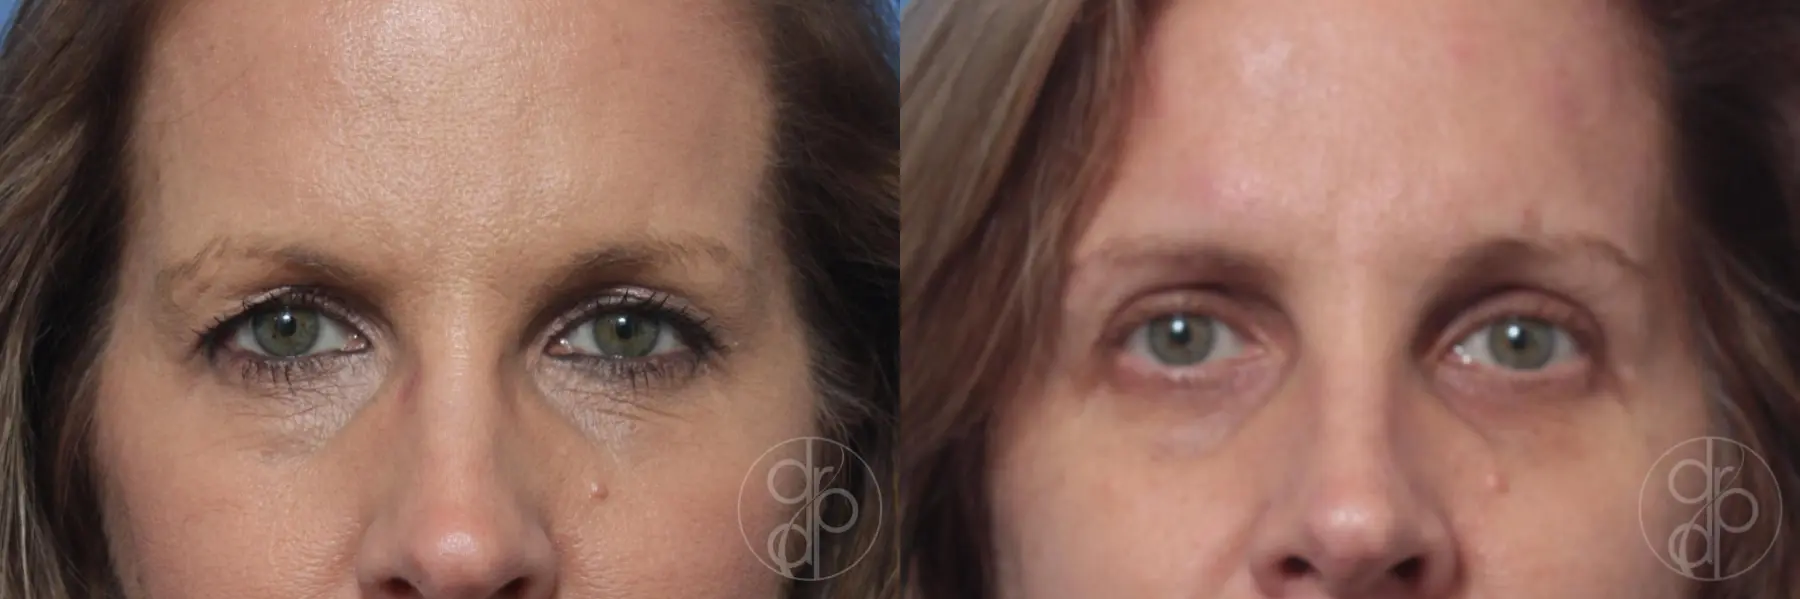 patient 10511 blepharoplasty before and after result - Before and After